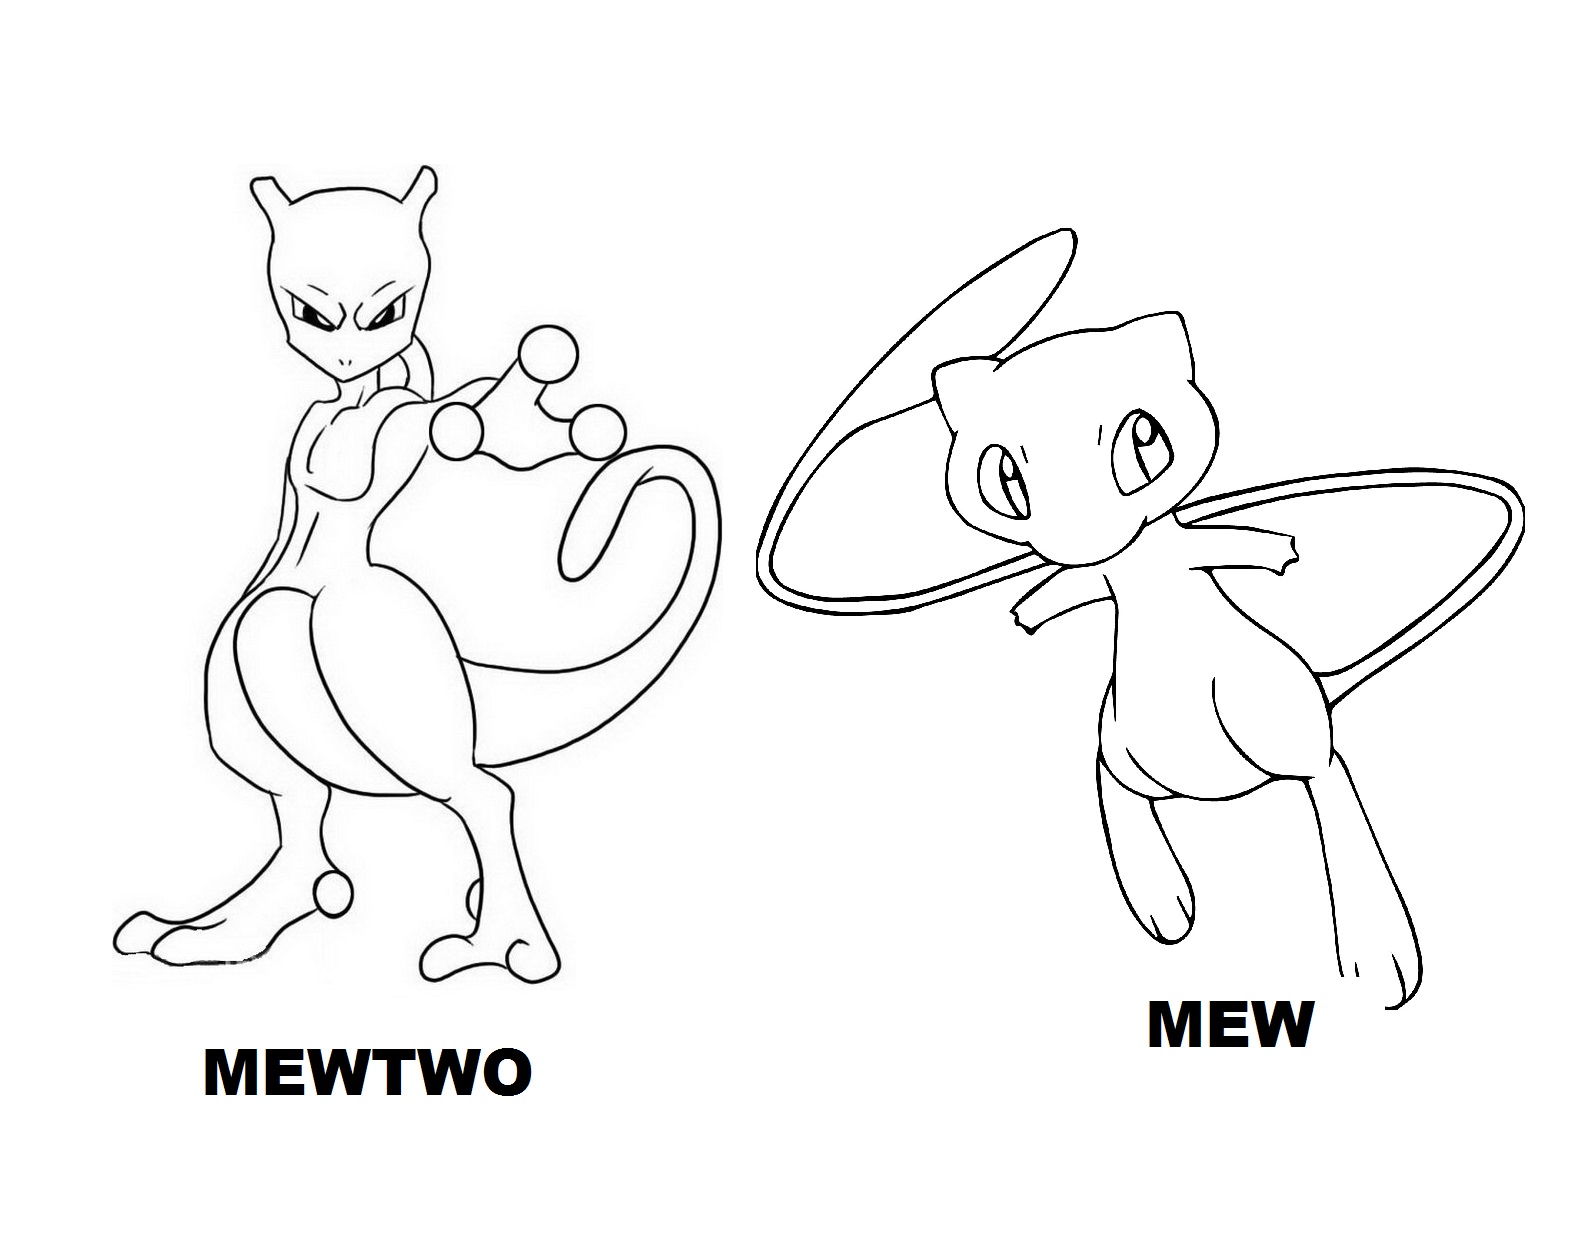 mew and mewtwo coloring pages